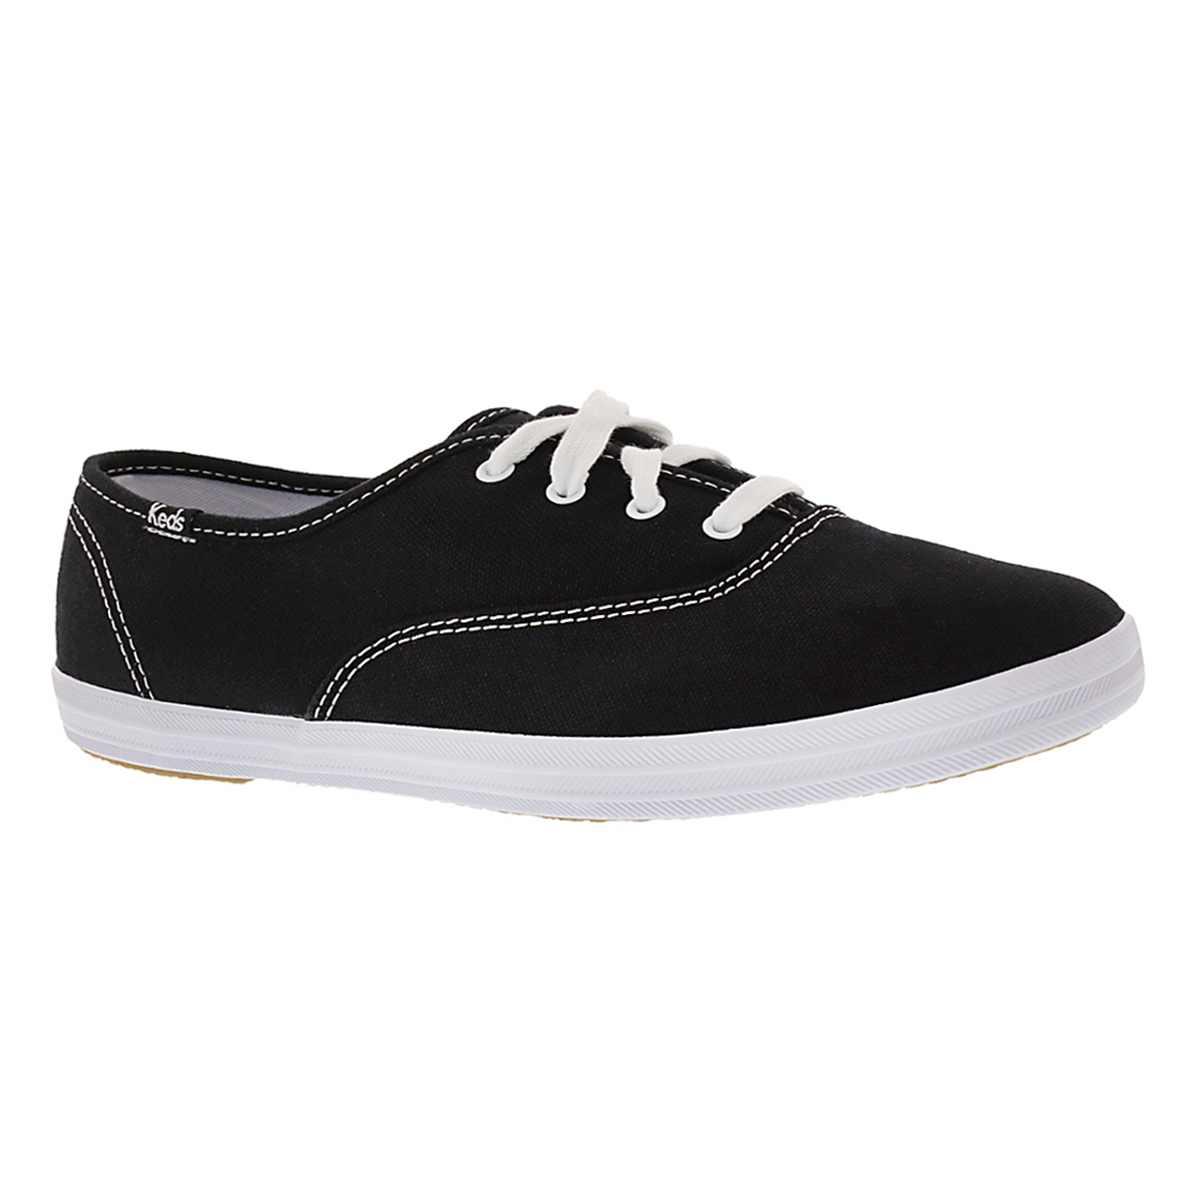 Keds Women's CHAMPION OXFORD black sneakers -Extra Wide